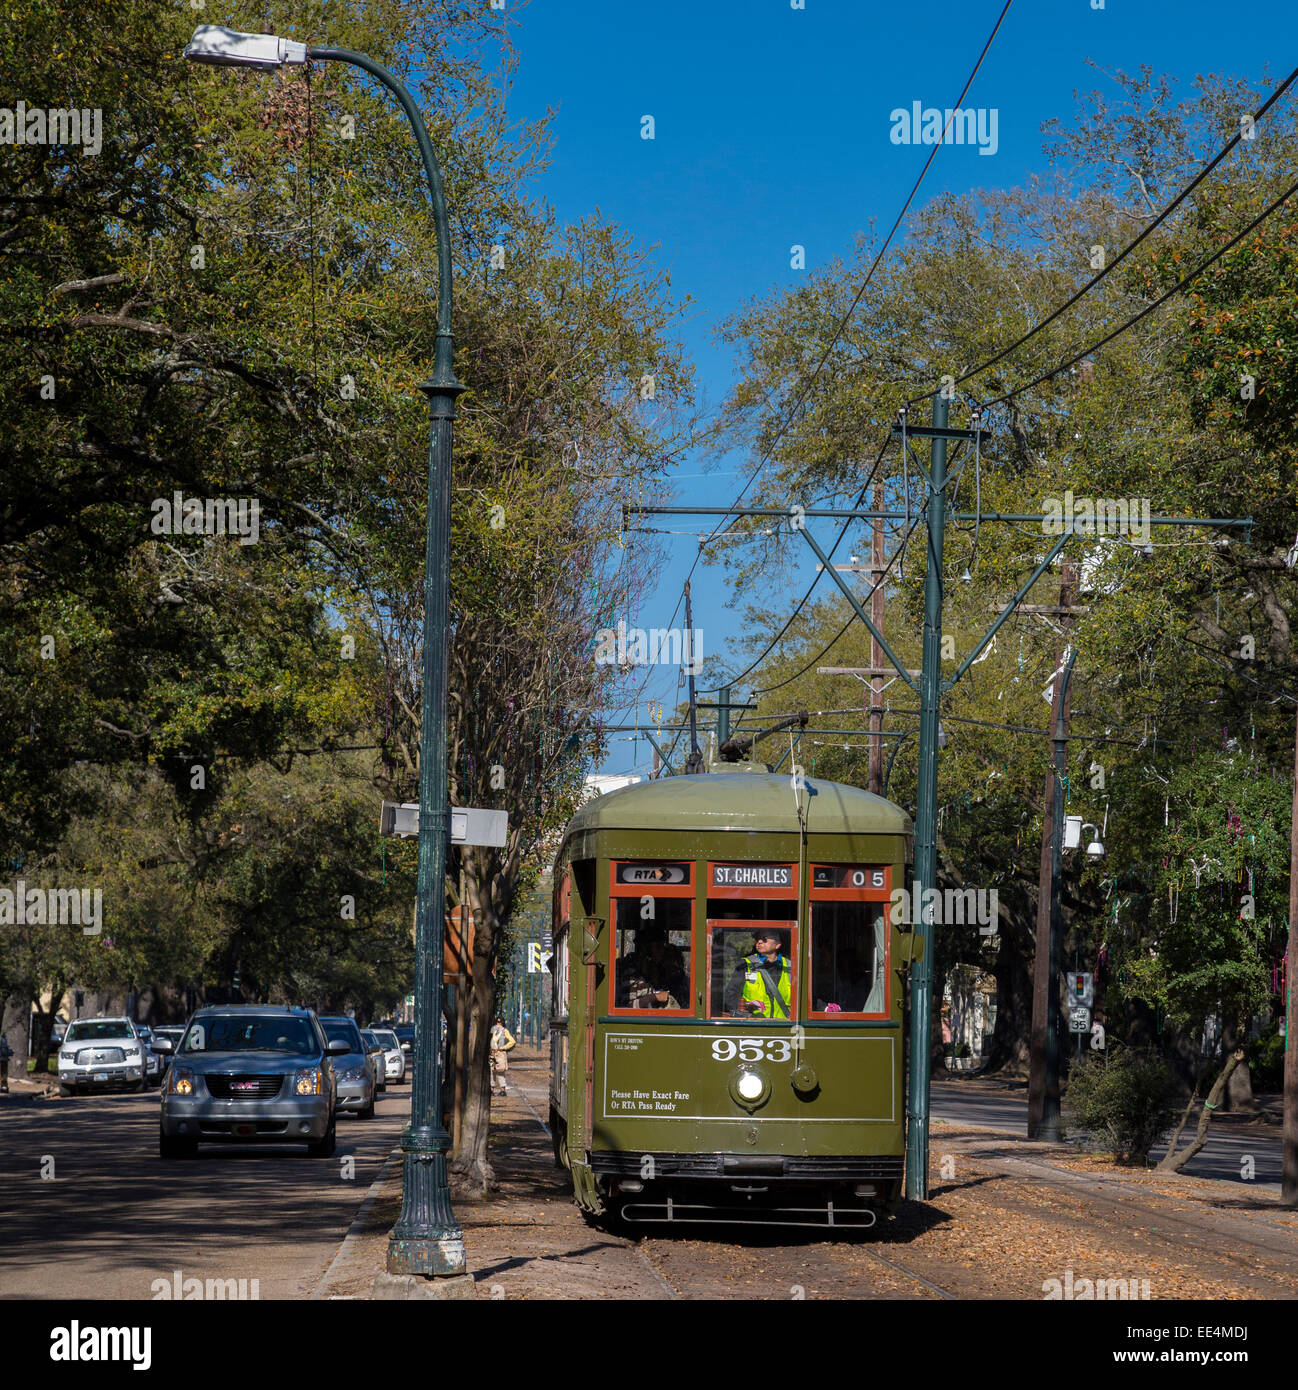 Garden District, New Orleans, Louisiana.  St. Charles Streetcar. Stock Photo